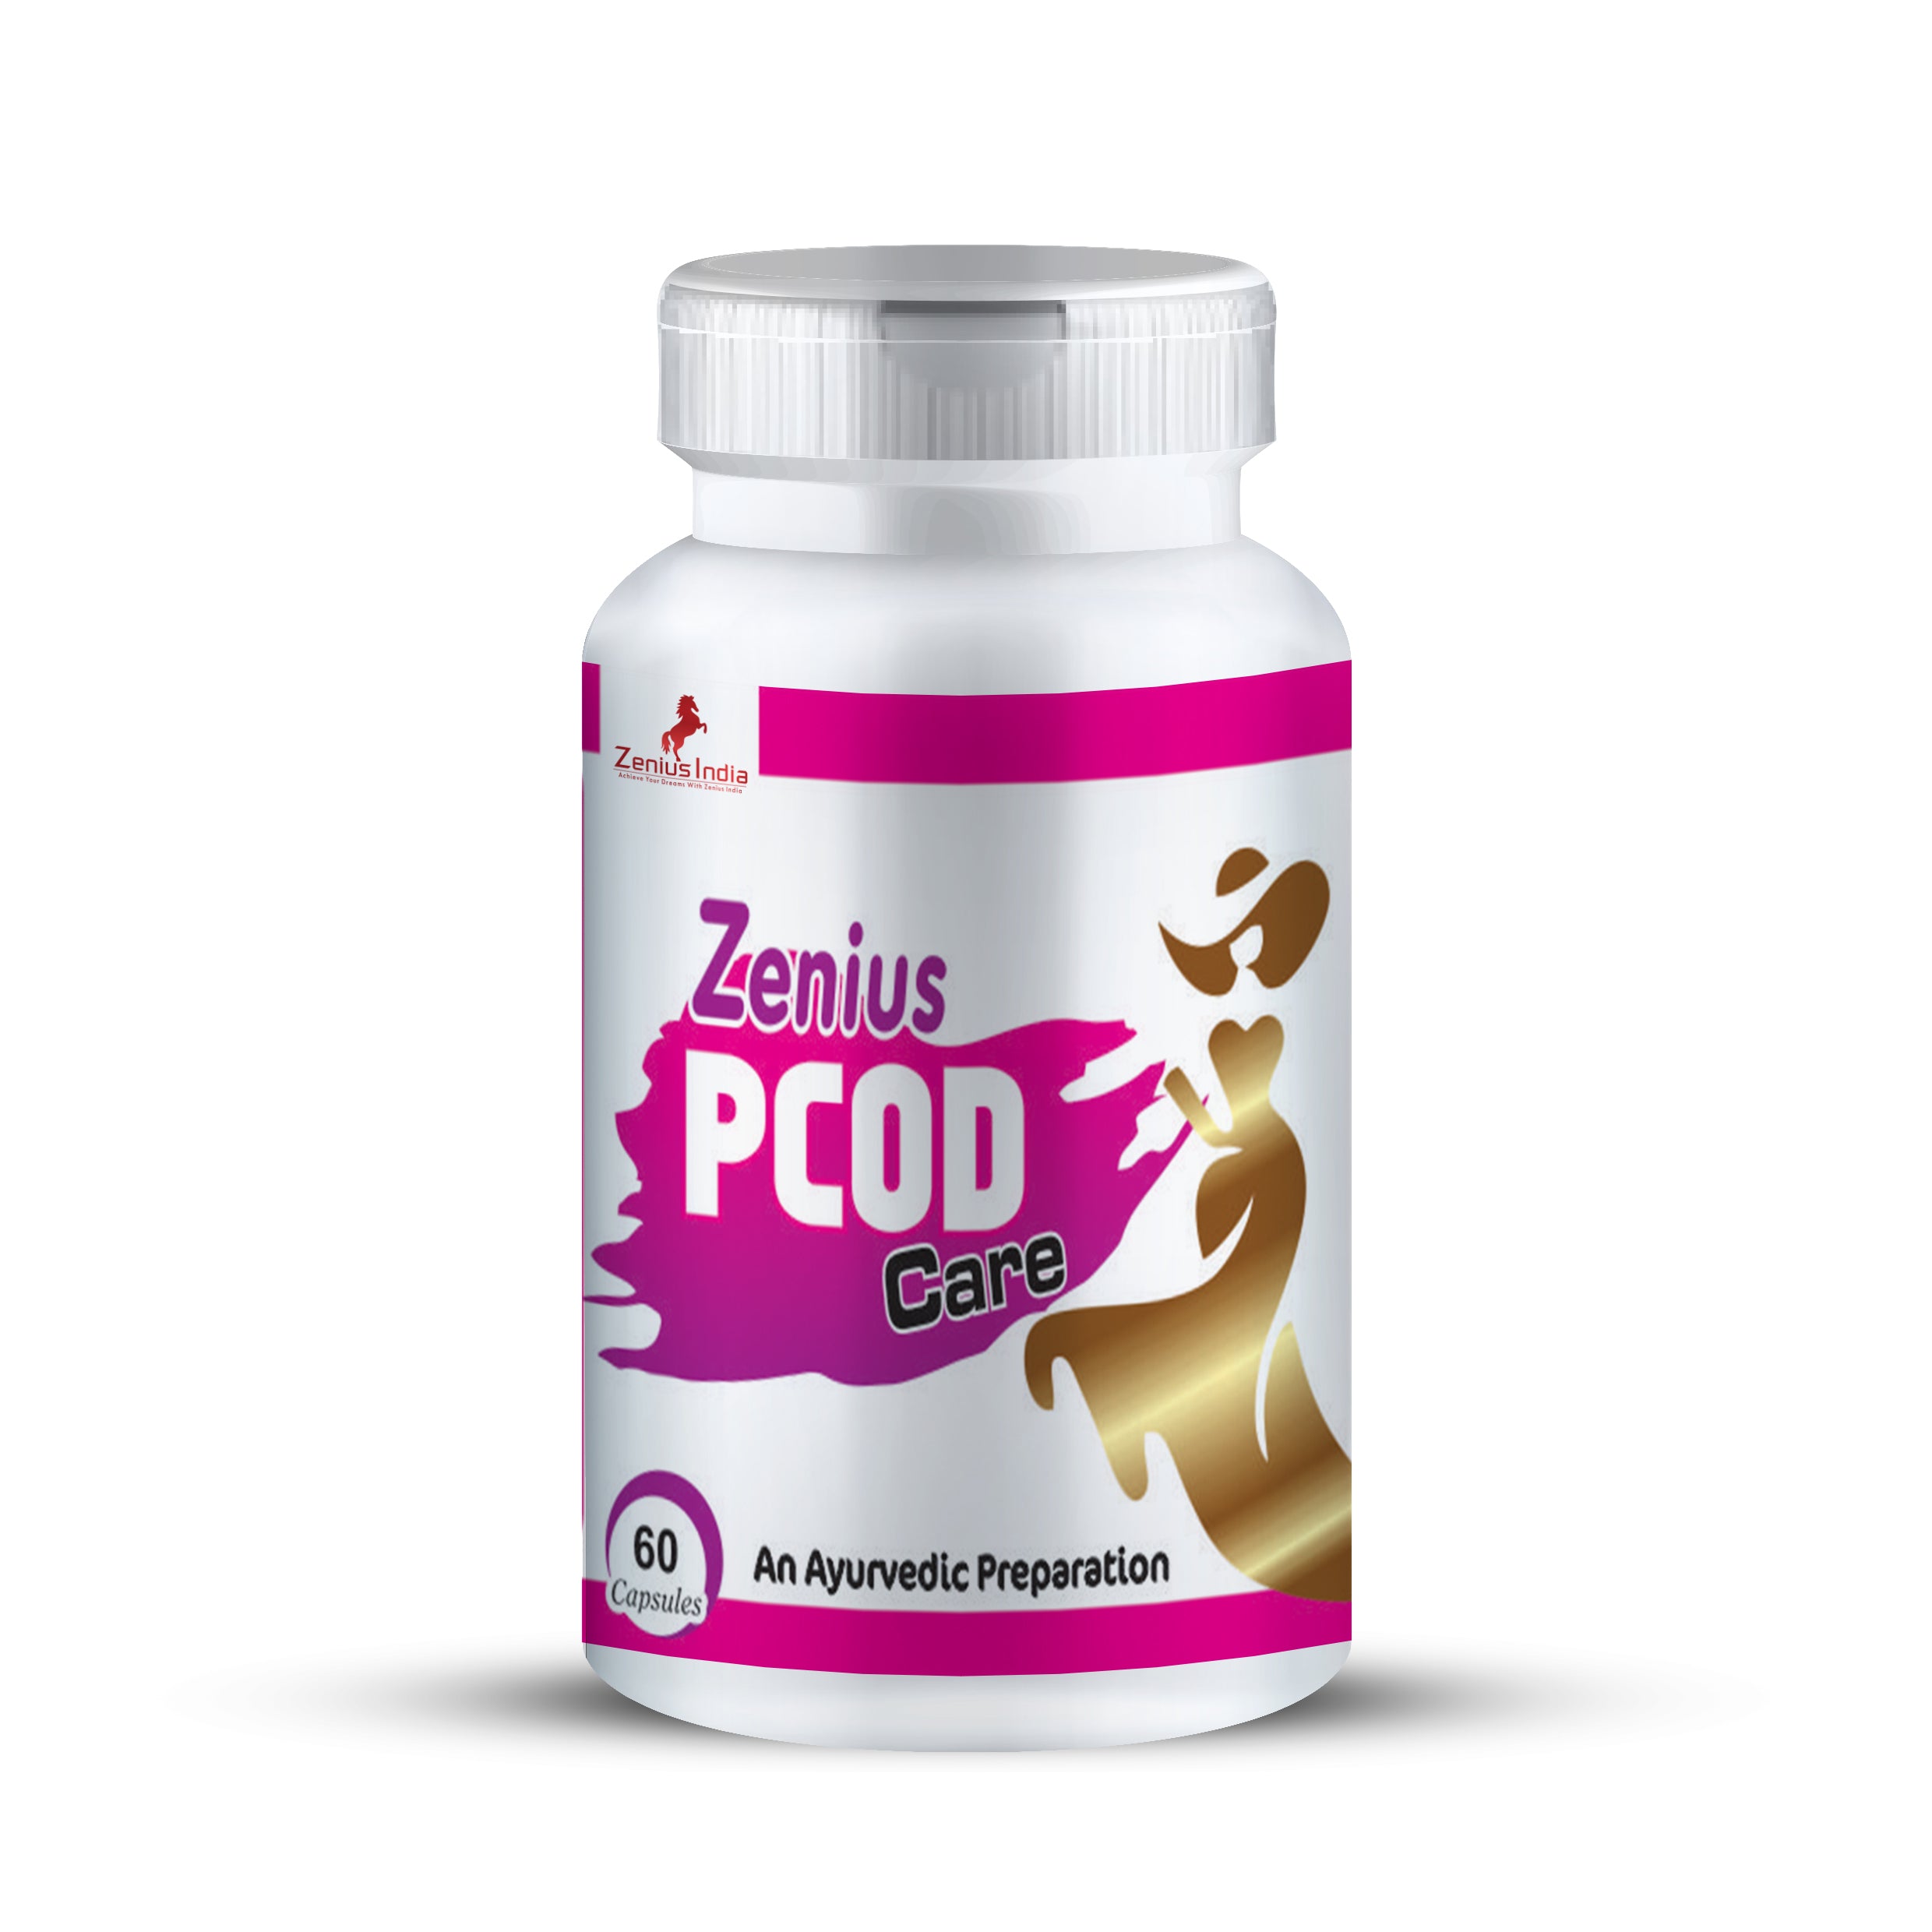 Zenius PCOD Care Capsule for Women's True Cycle for Timely